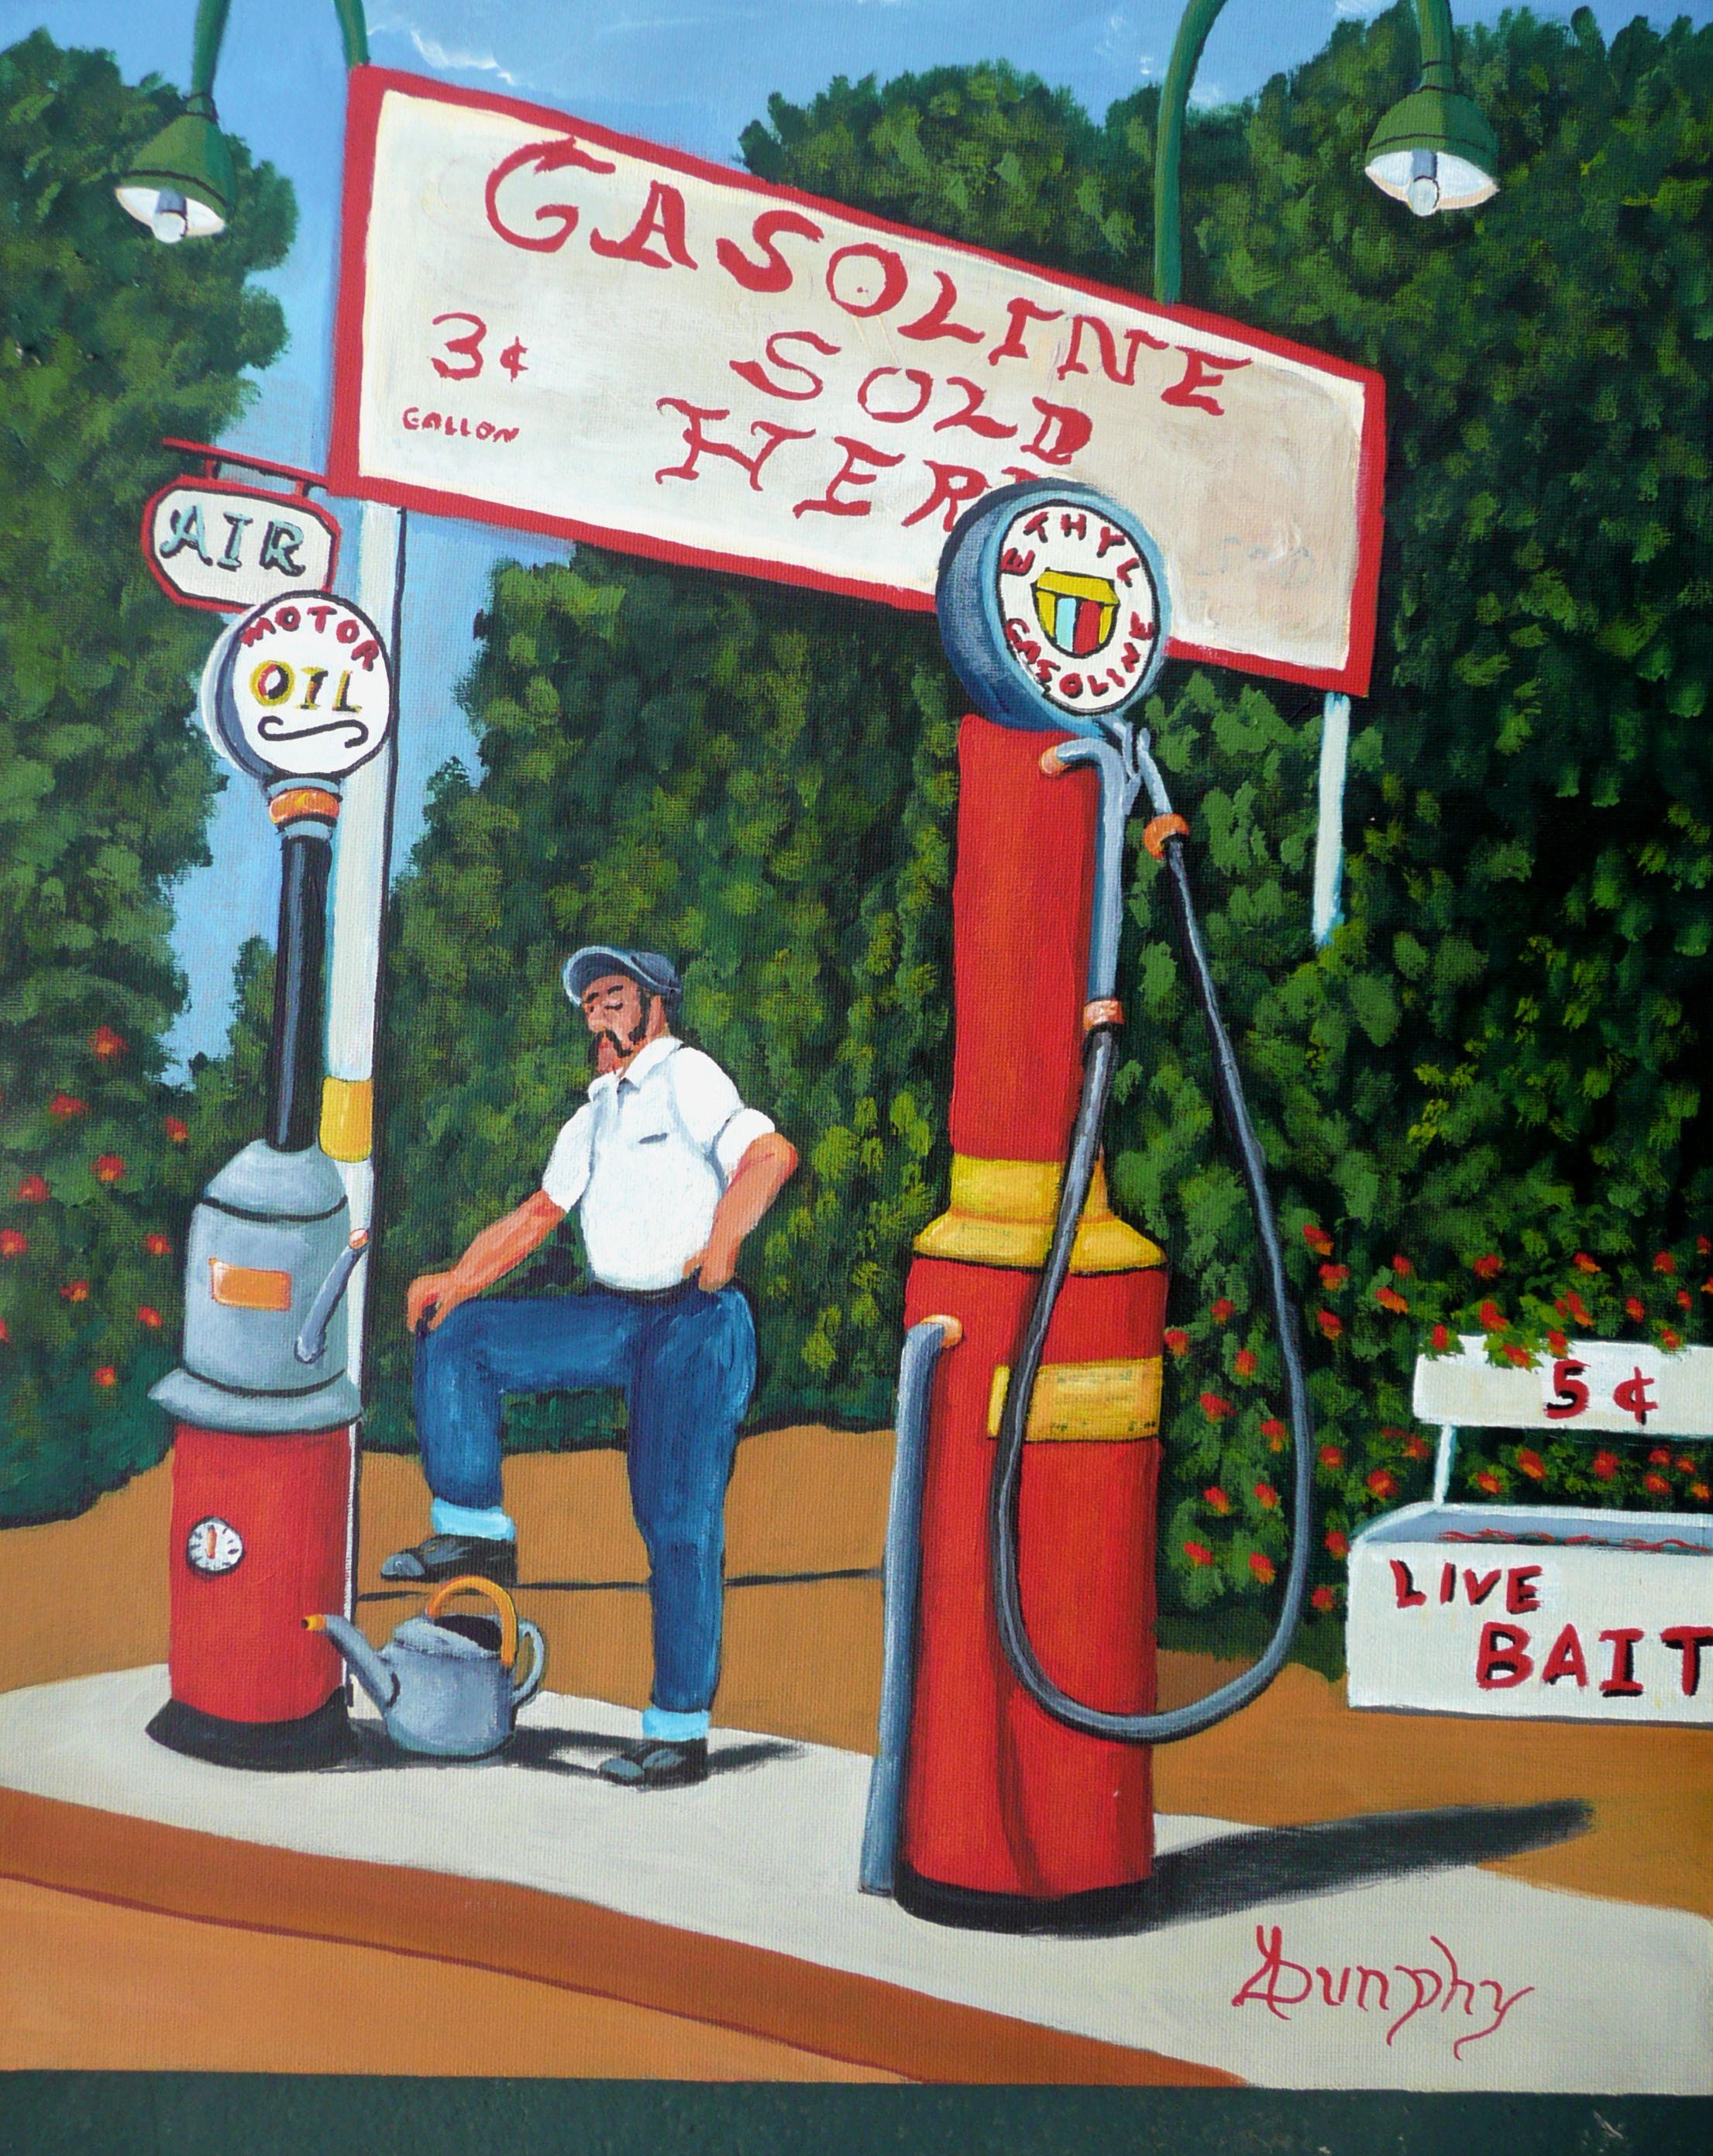 A service station attendant stands ready to serve his customers who come to fuel up their automobiles. This rural gas station was typical of the small service outlets which dotted the countryside back in the early days of motoring. This painting has